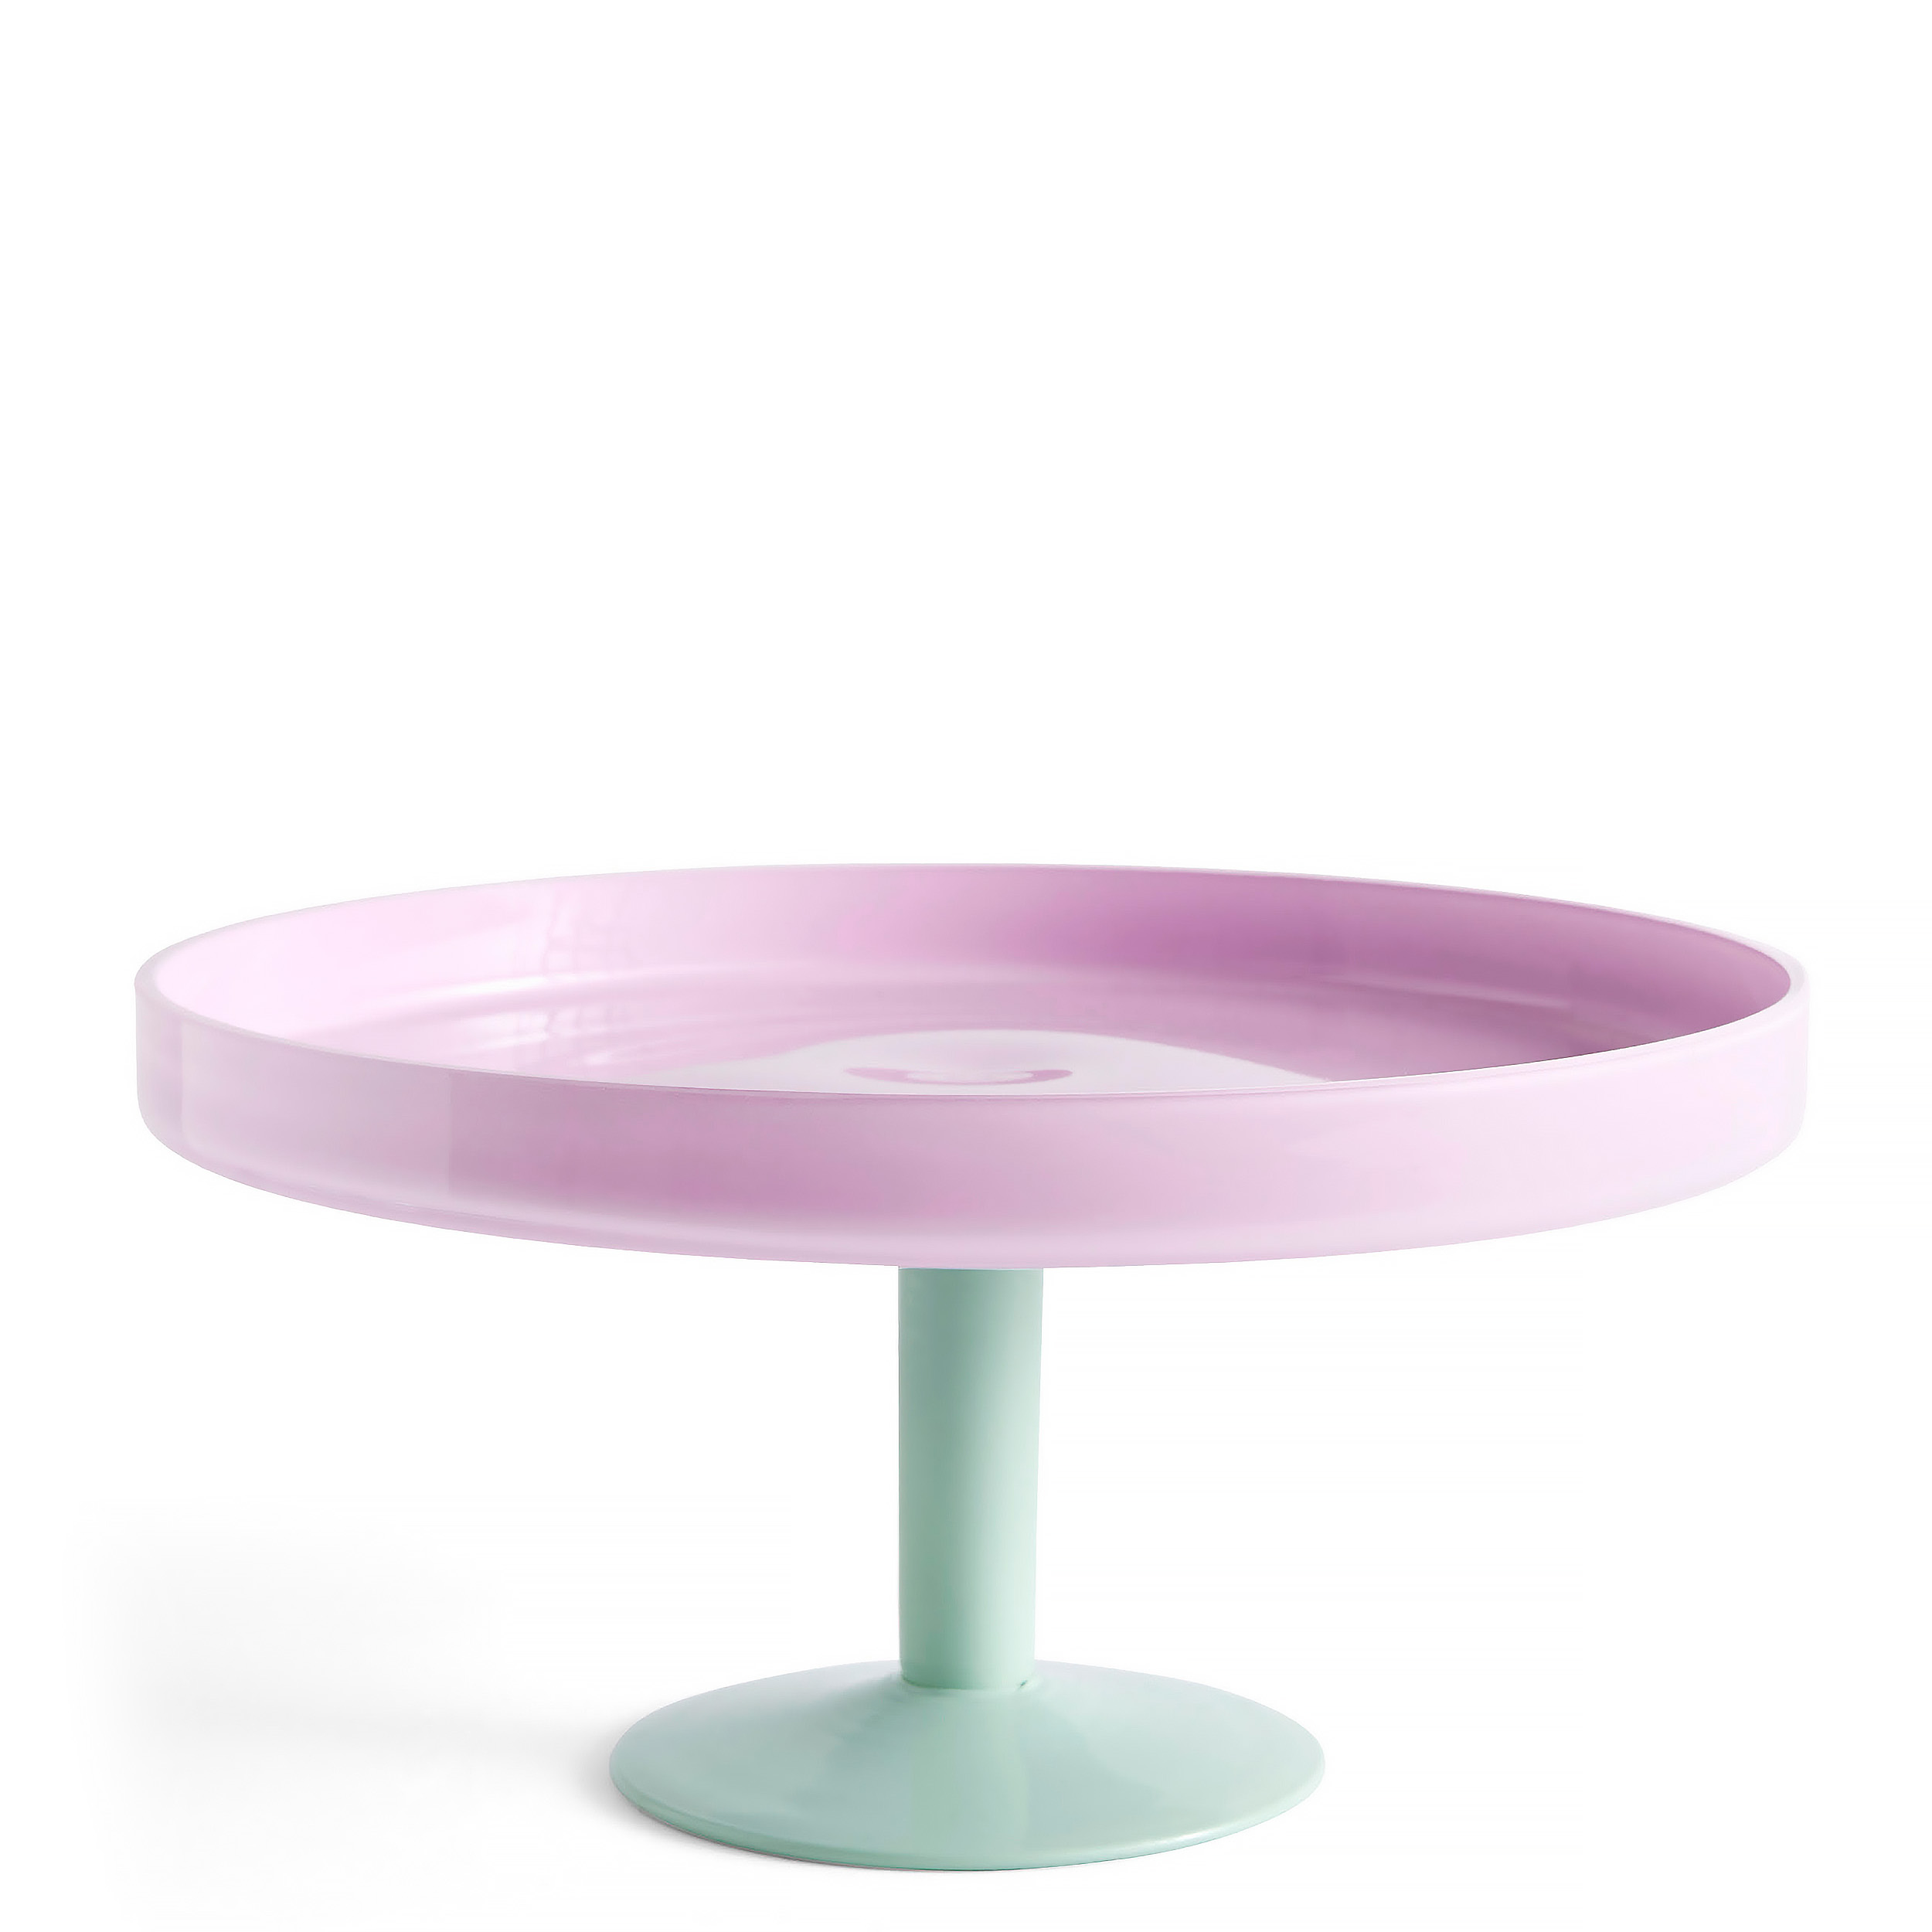 HAY Cake Stand Pink/Mint